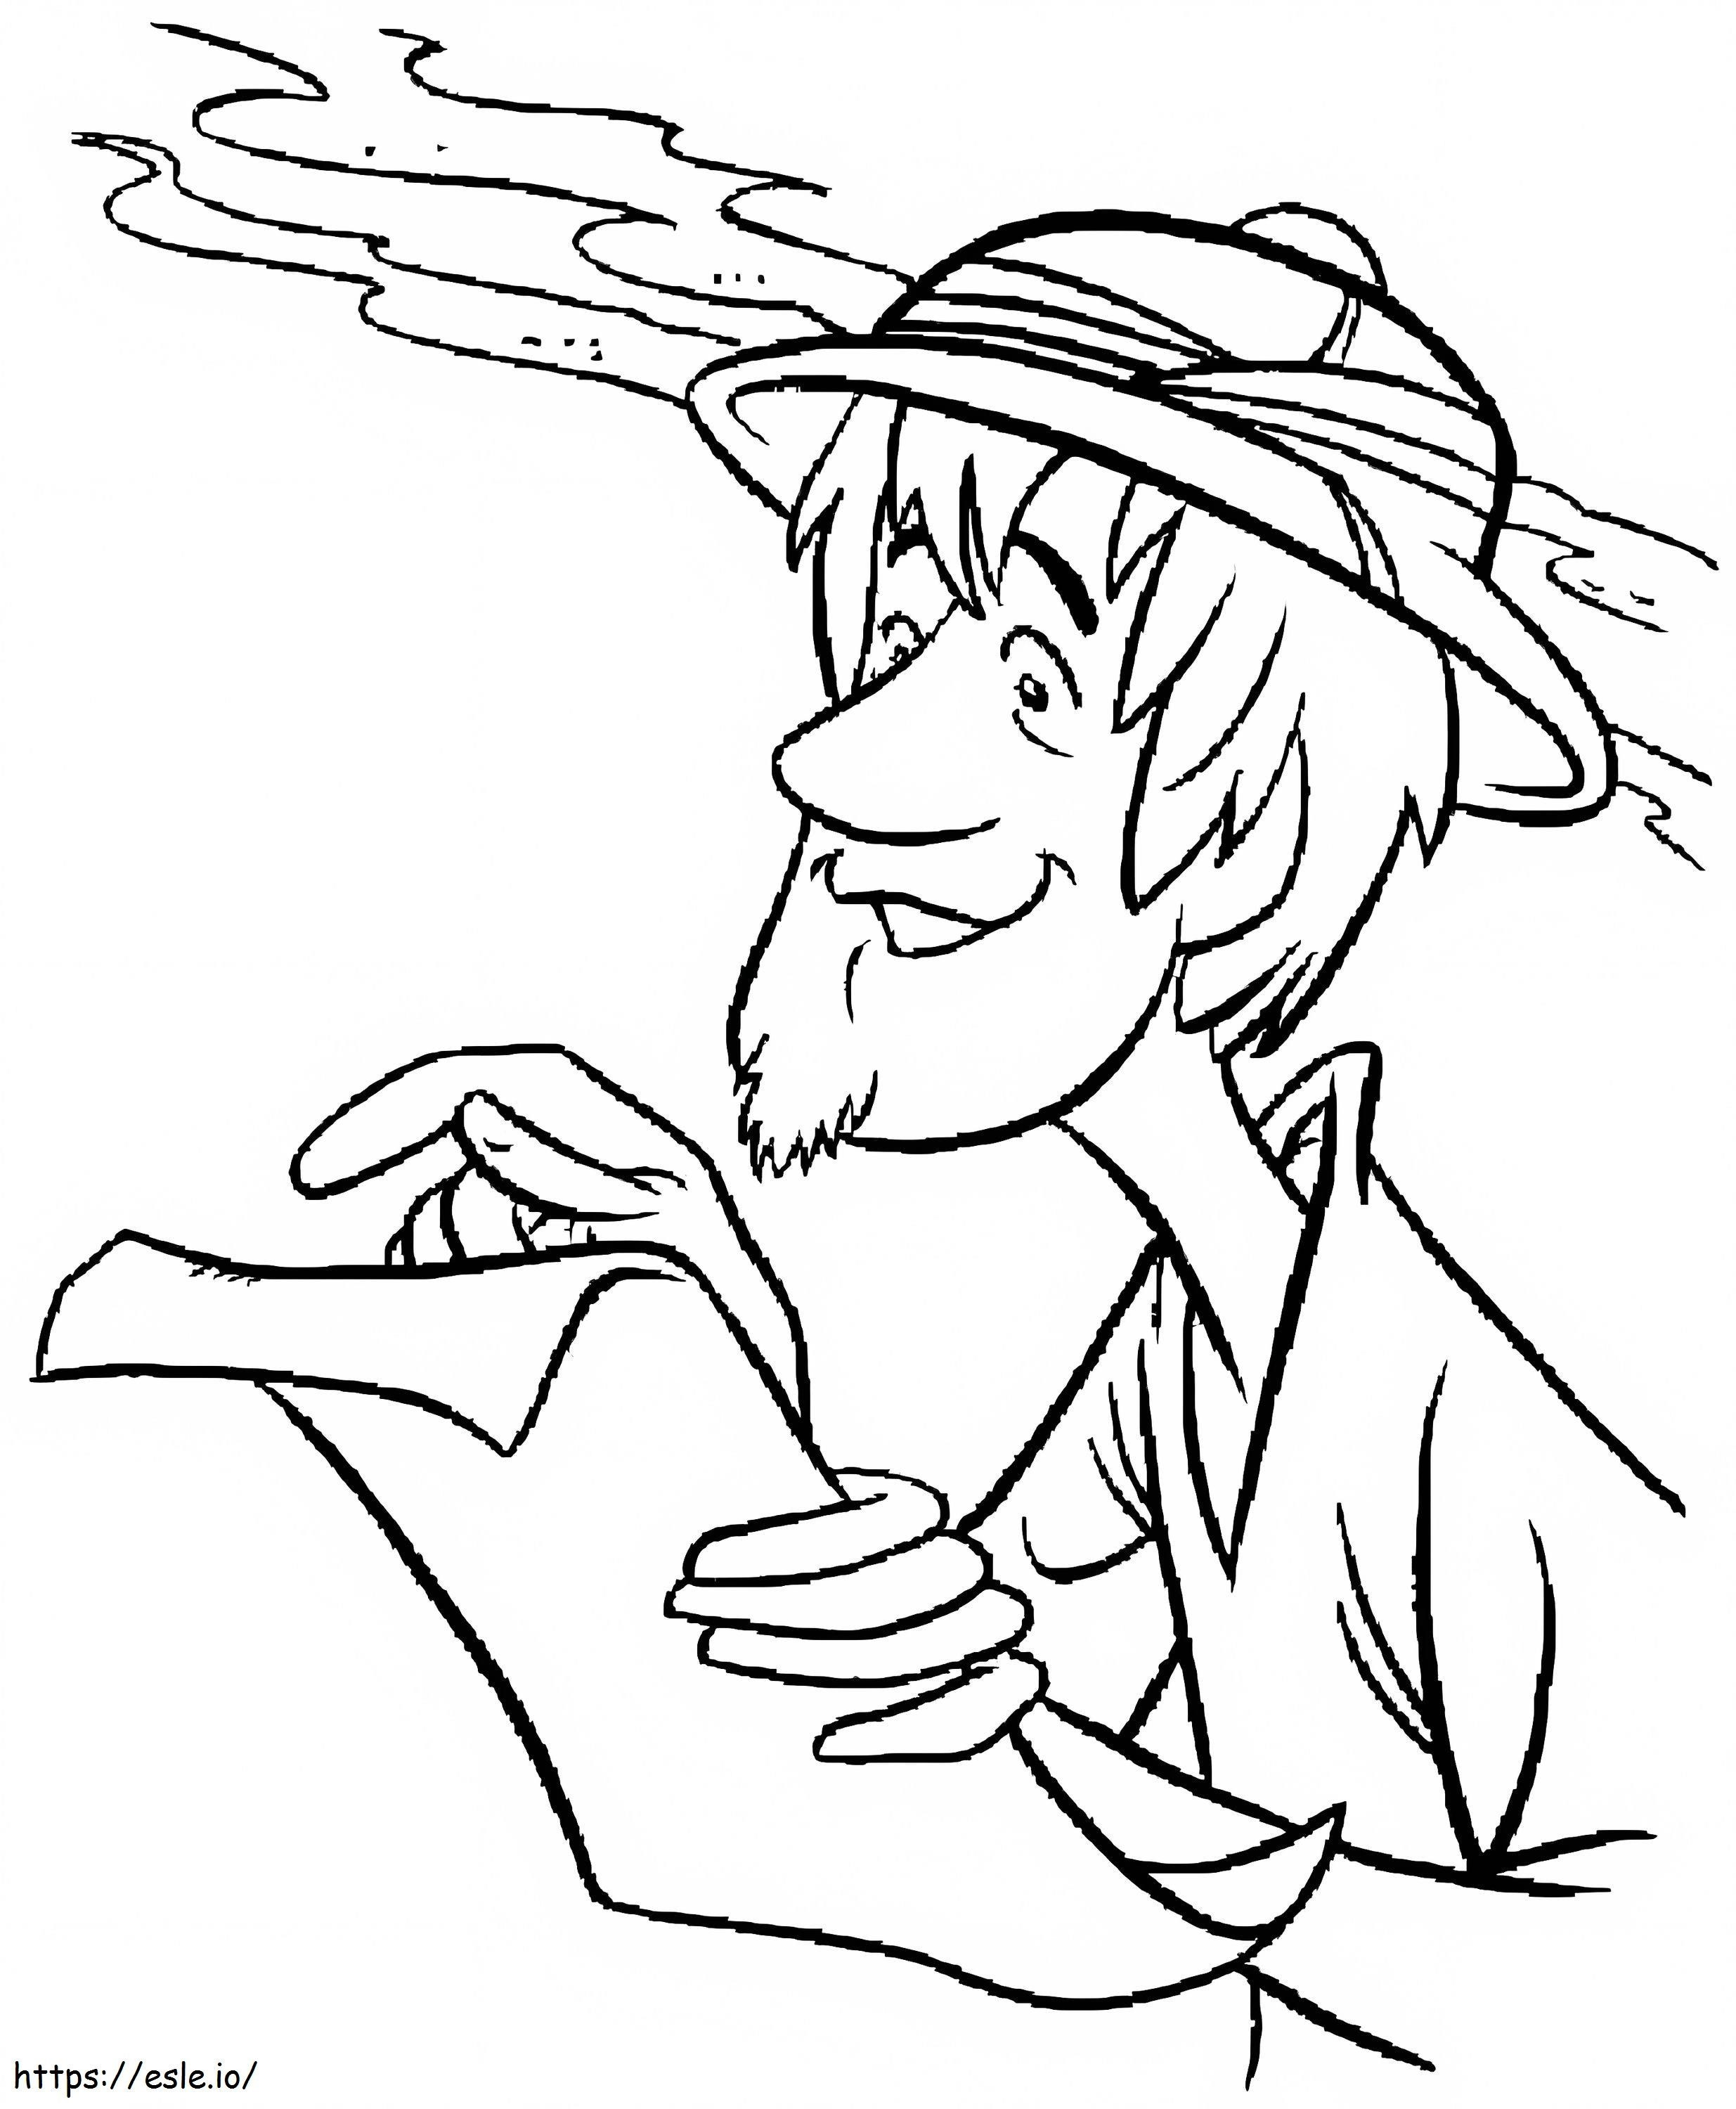 Awesome Shaggy coloring page